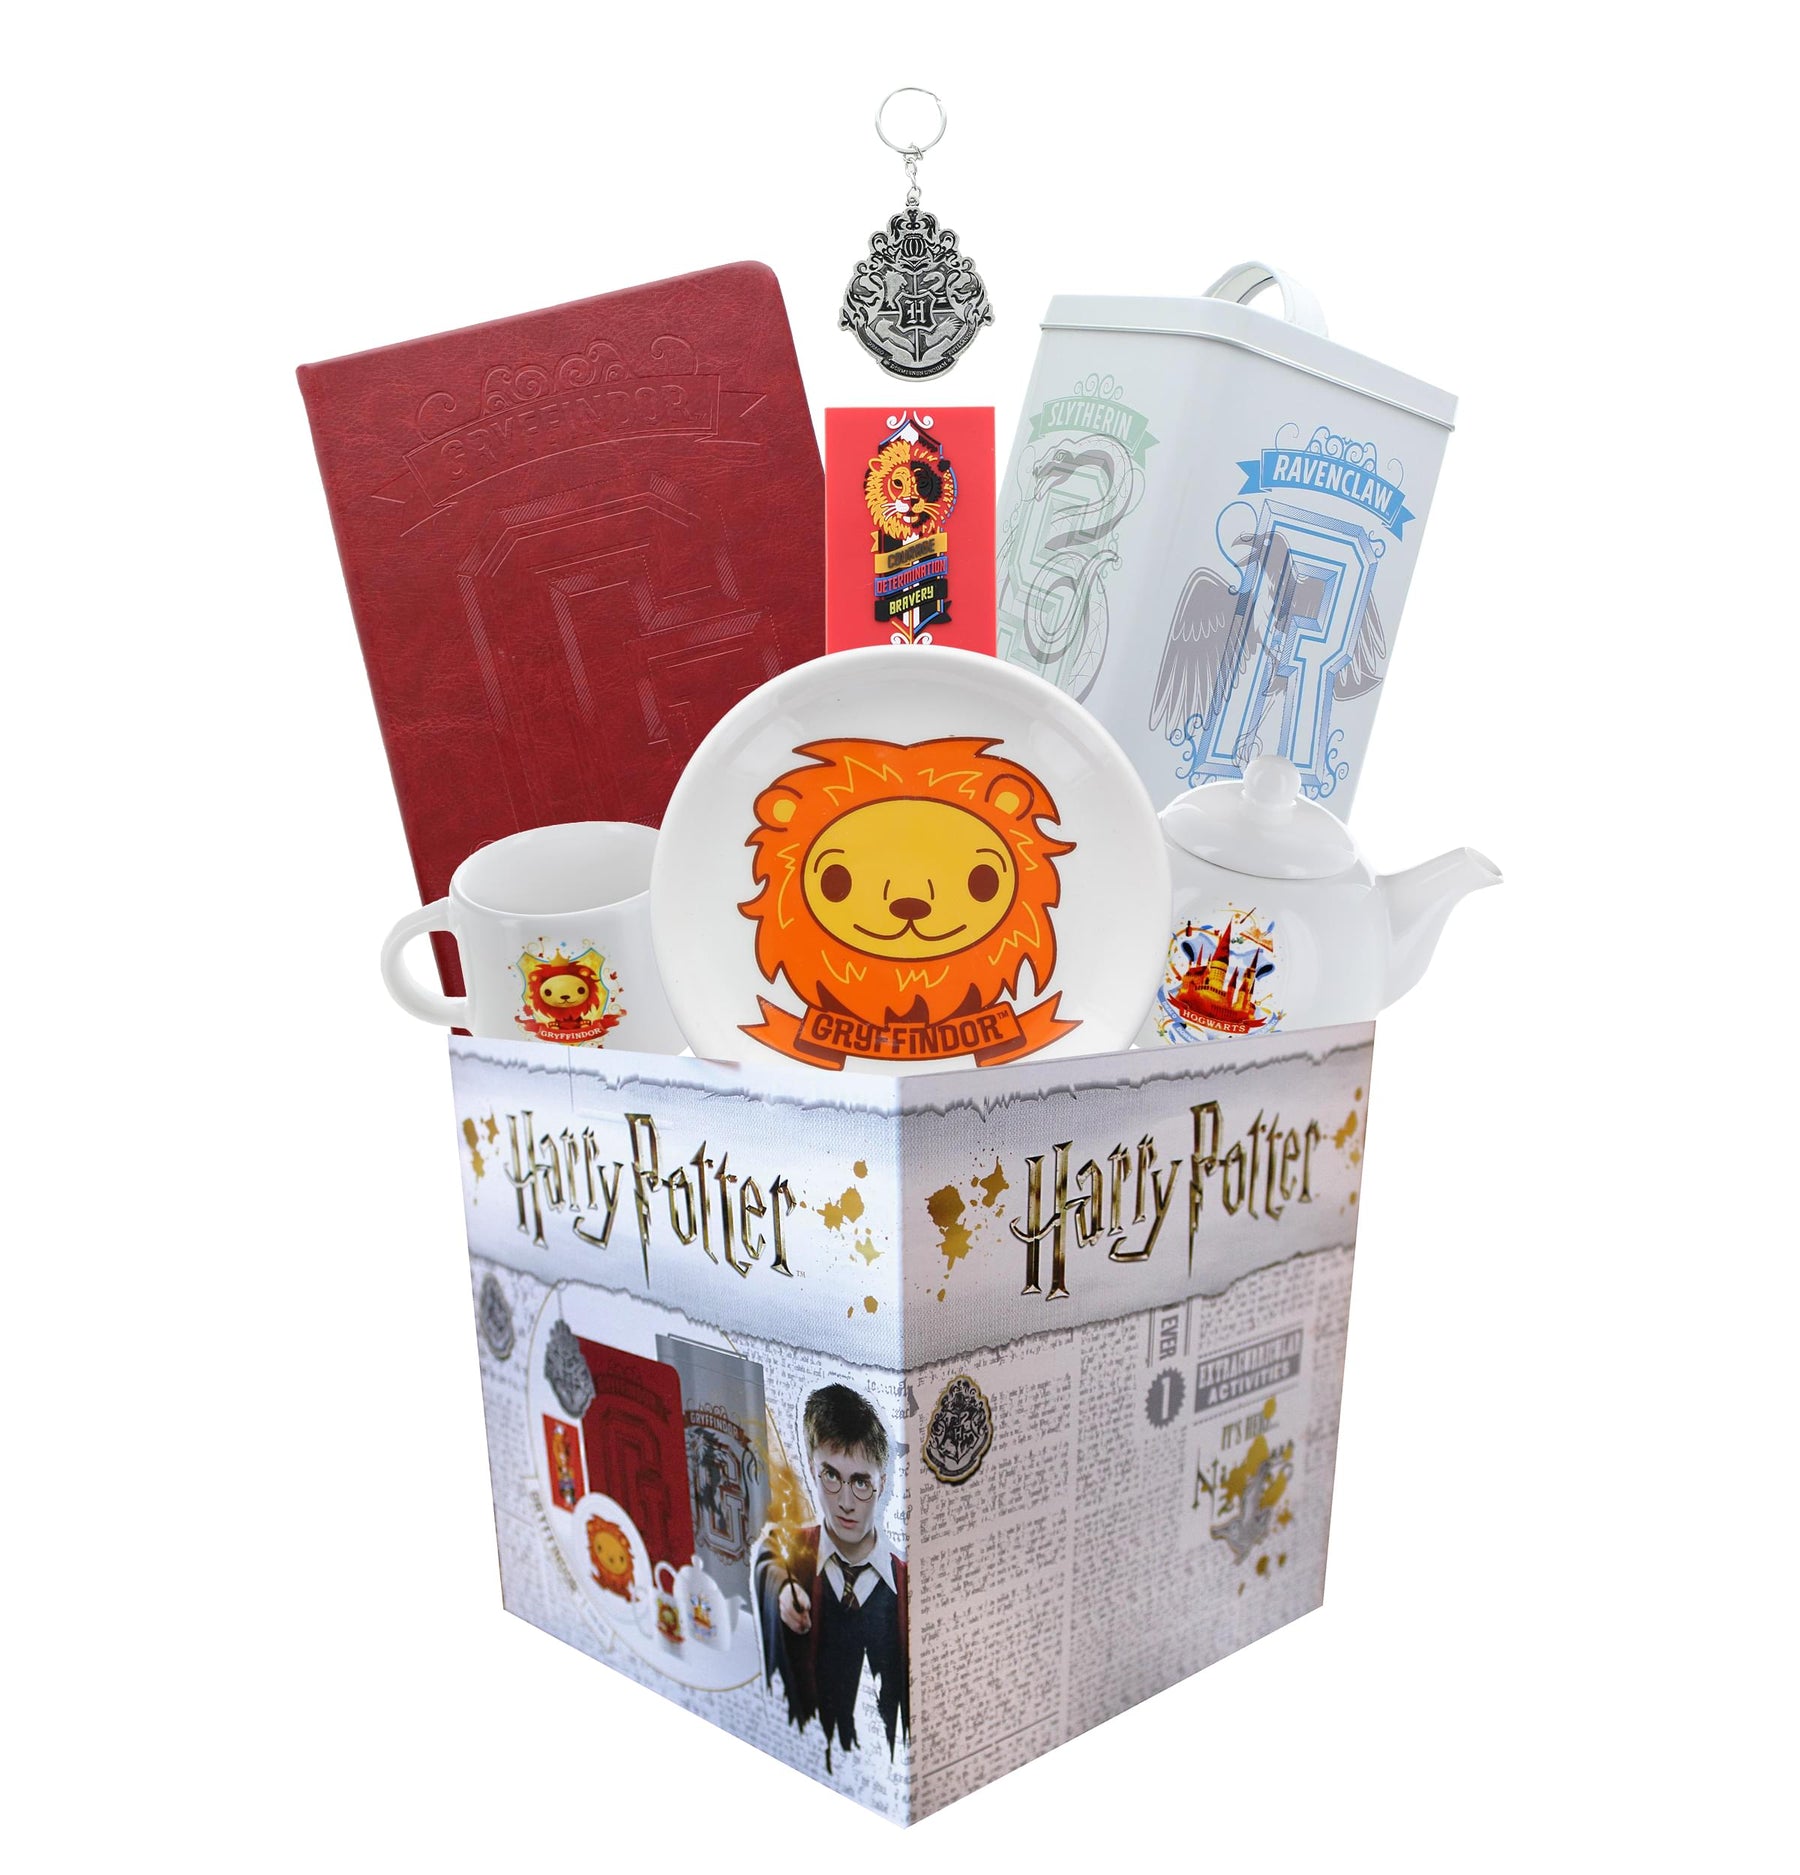 Harry Potter Gryffindor House LookSee Box | Contains 7 Harry Potter Themed Gifts